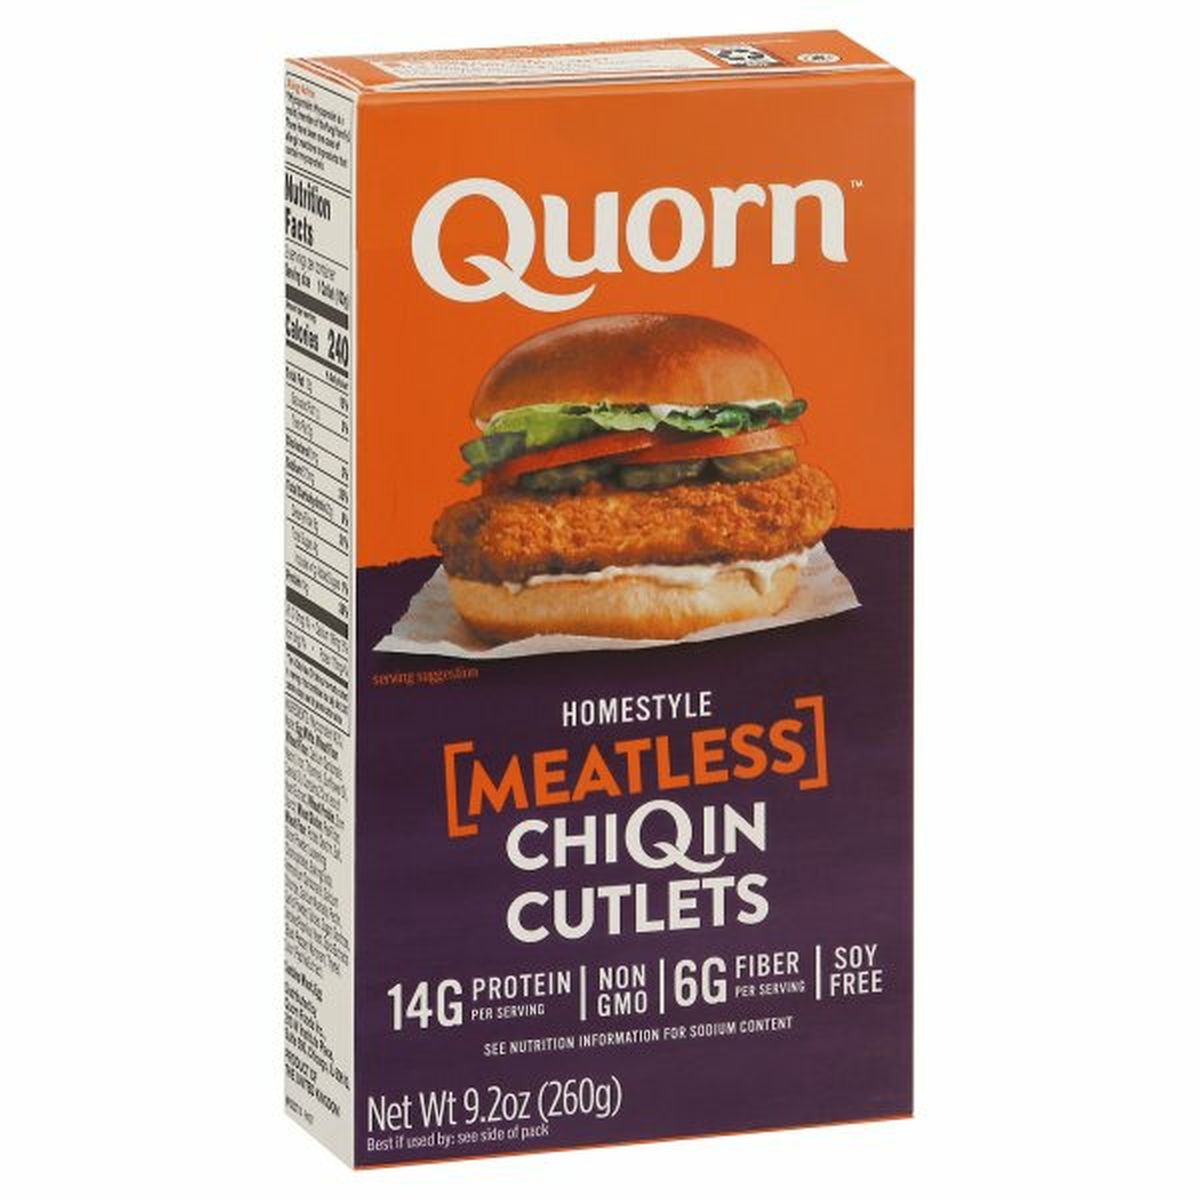 Calories in Quorn Chiqin Cutlets, Meatless, Homestyle